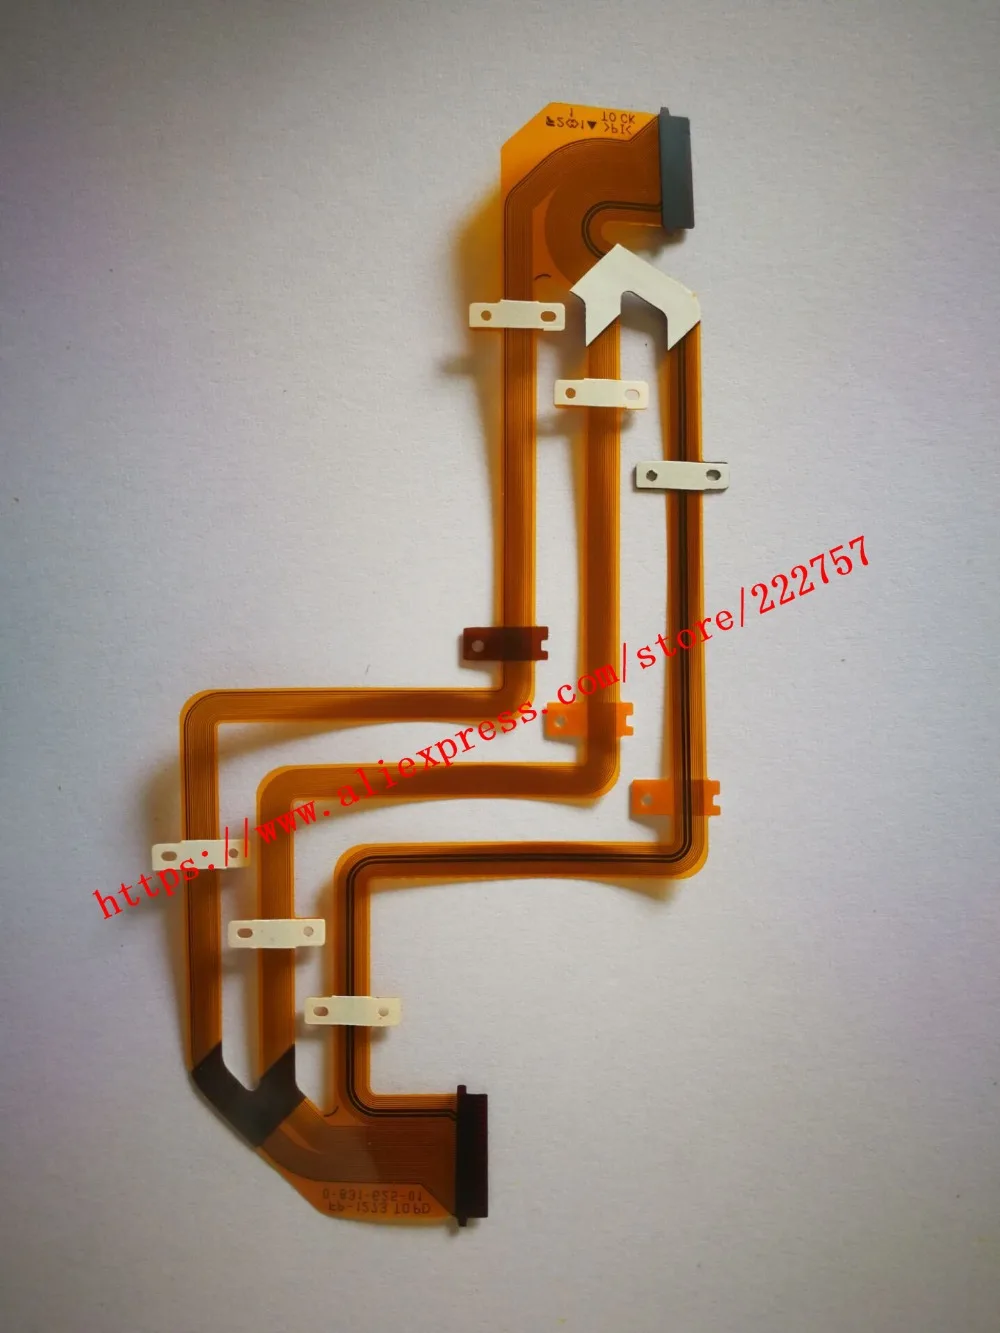 FP-1273 LCD Flex Cable For SONY NEX-VG10E VG10 Video Camera Repair Part USA 